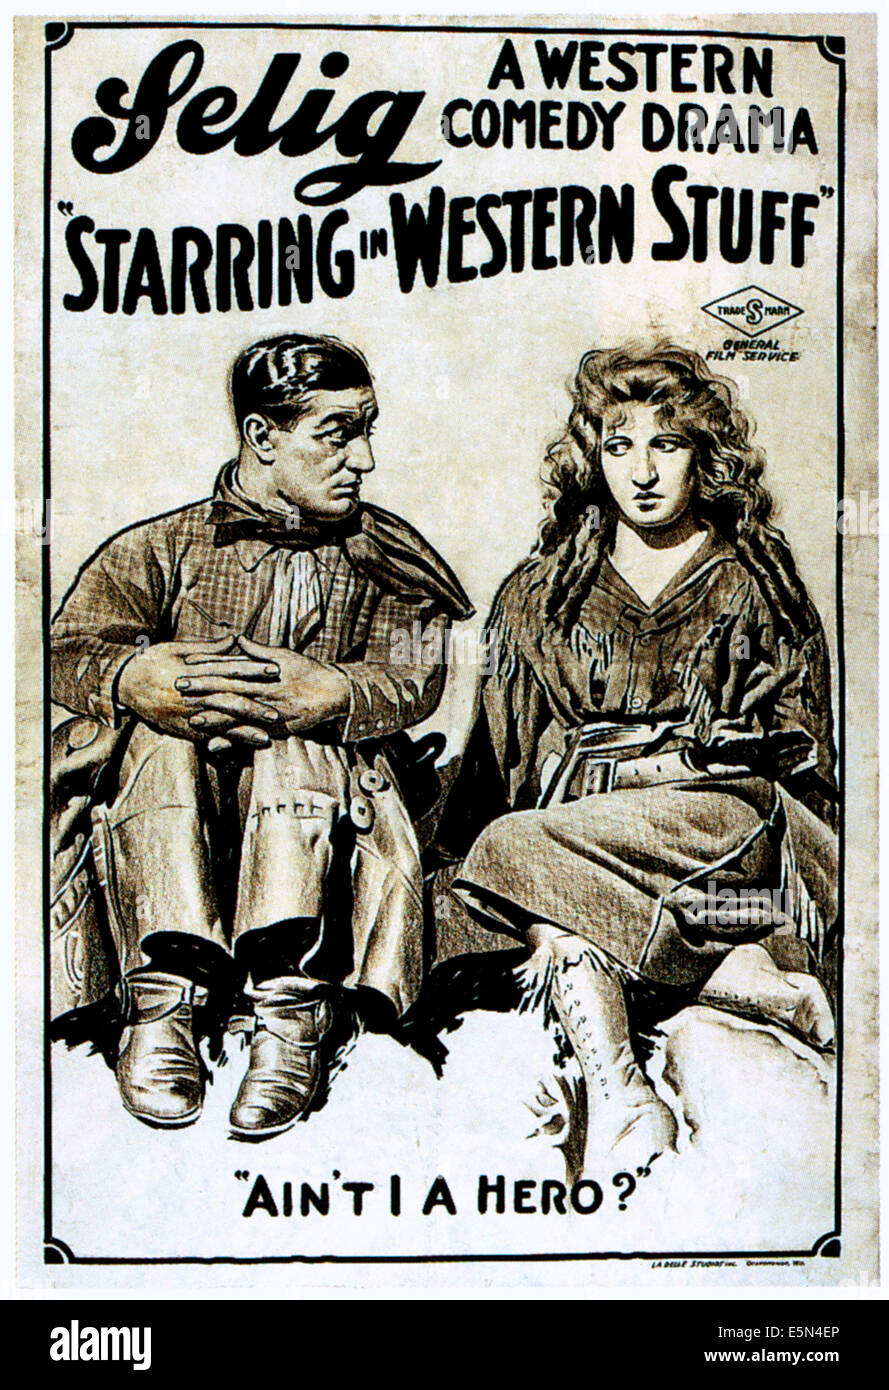 STARRING IN WESTERN STUFF, from left: Tom Mix, Victoria Forde, 1917. Stock Photo